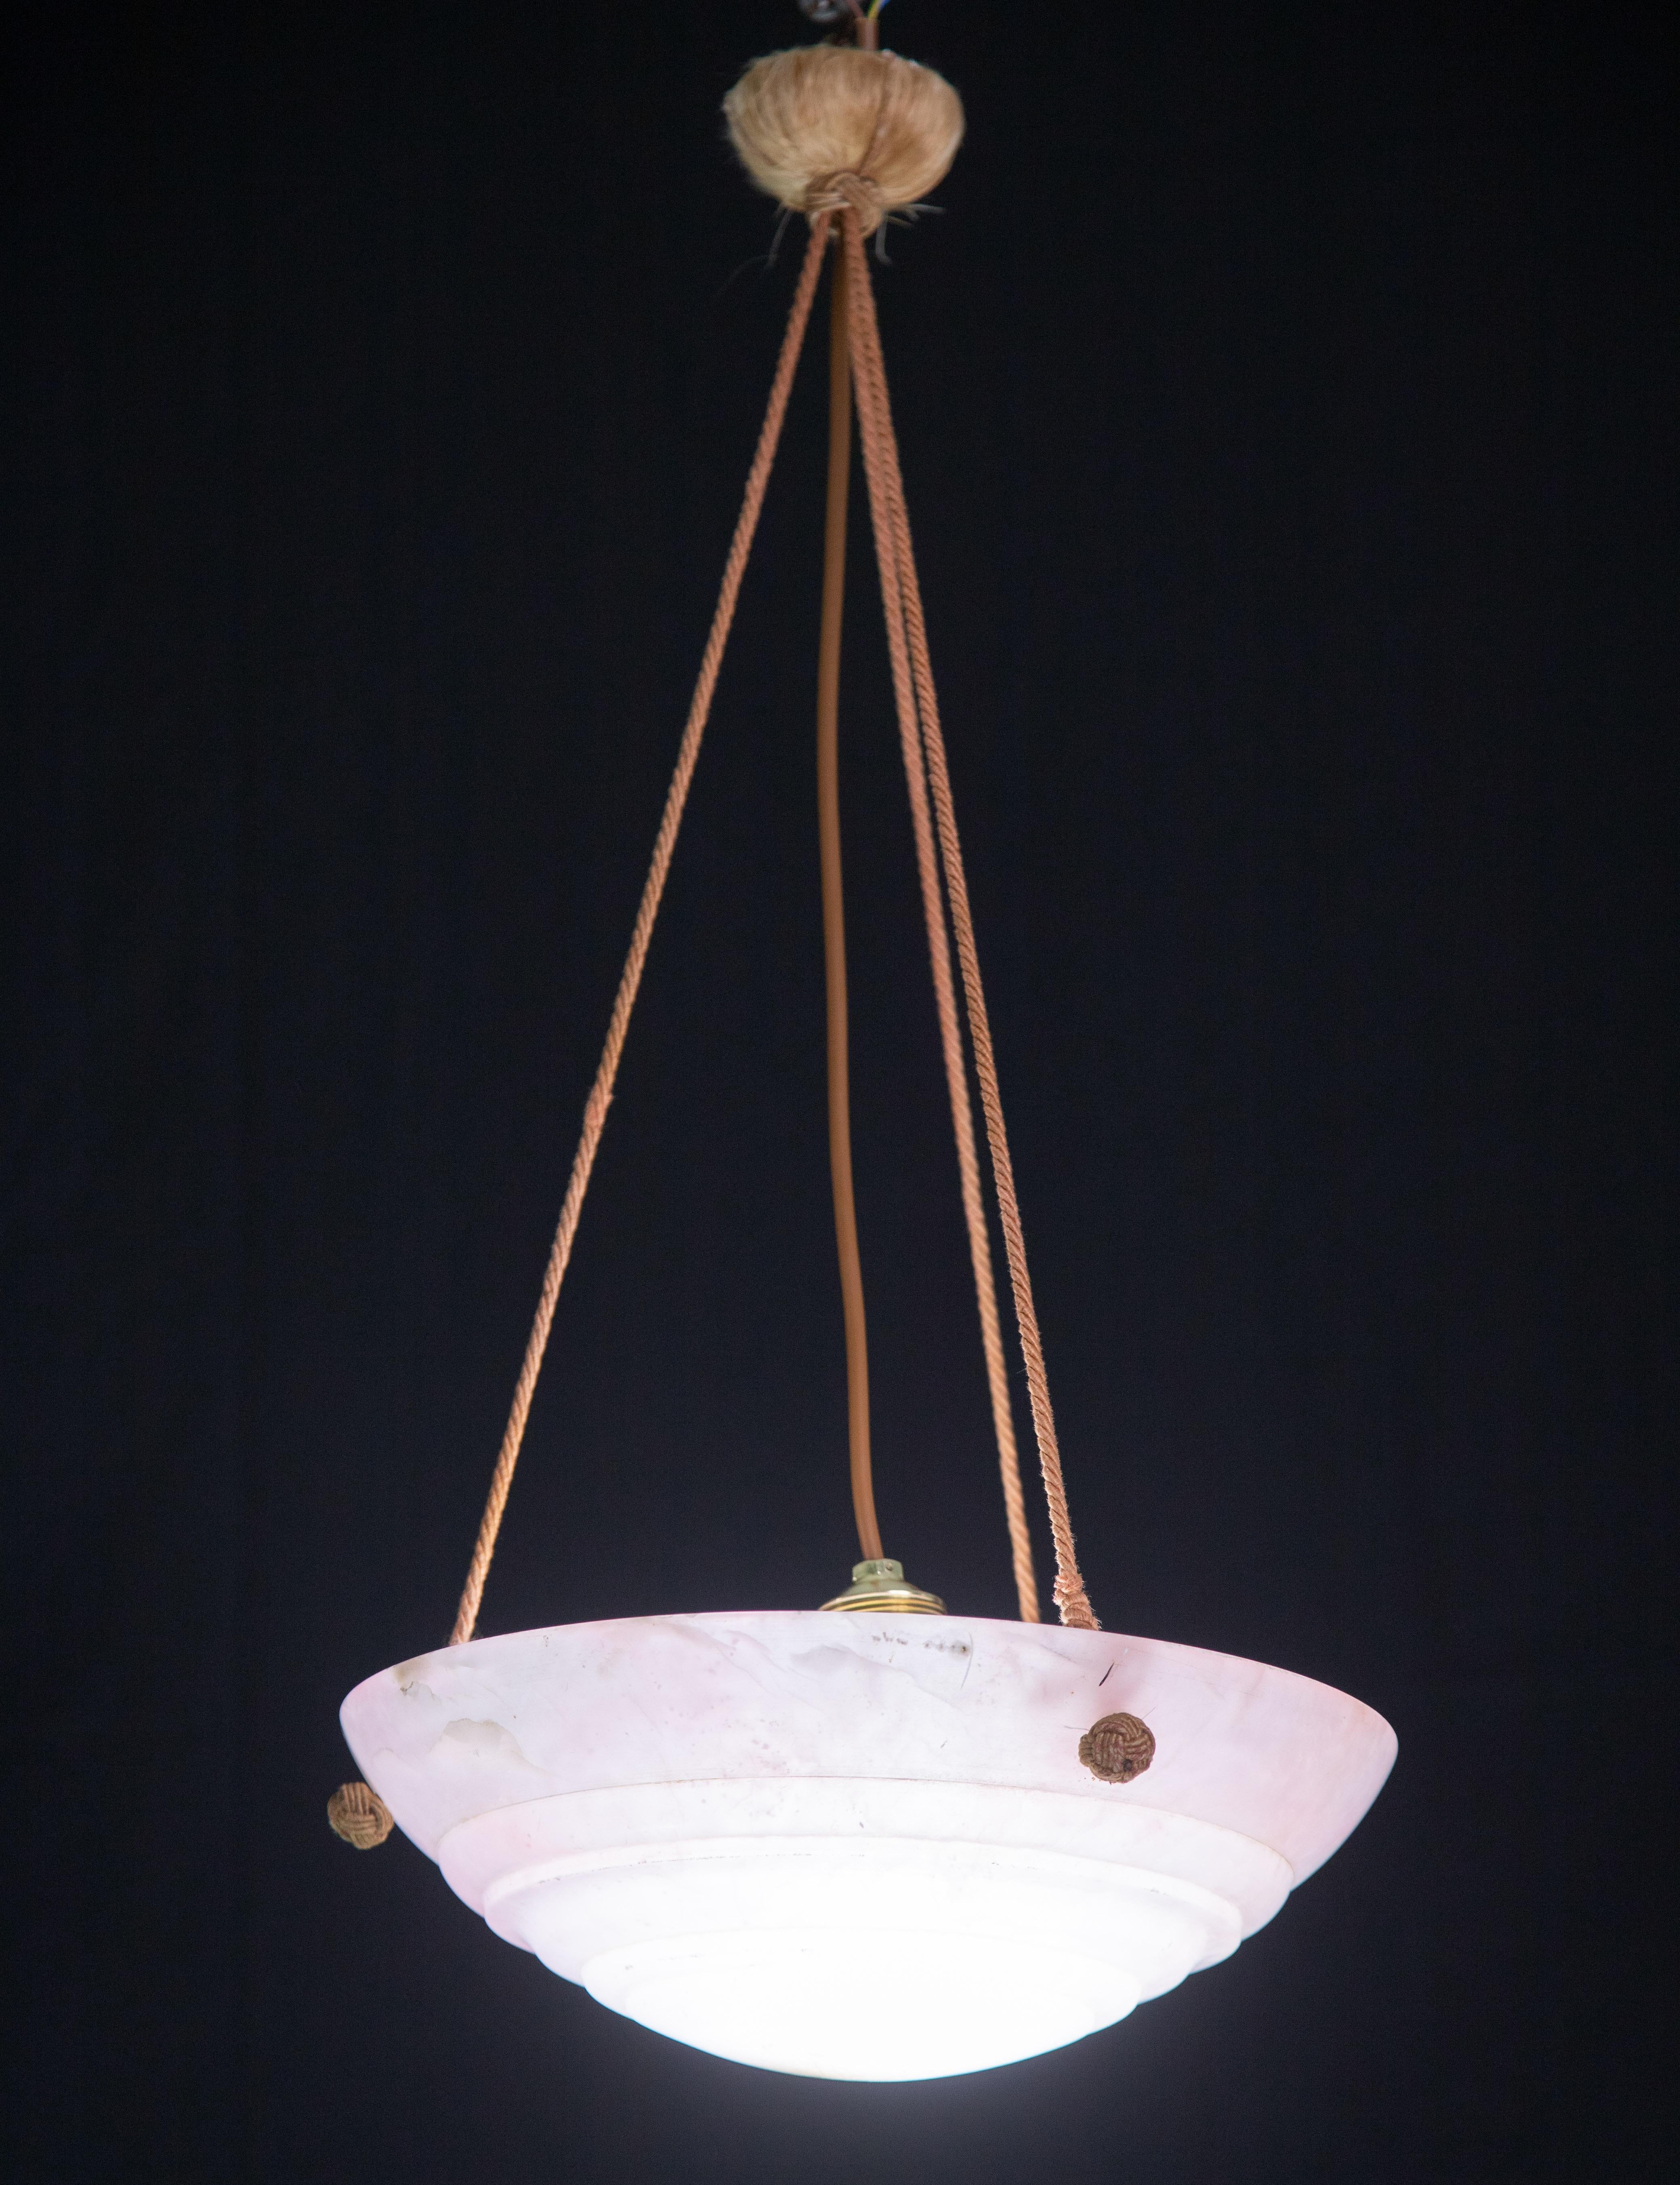 Antique pink alabaster hanging chandelier in Art Deco style, circa 1940s.
A unique piece in pink alabaster, beautifully crafted with hues and reflections of other colors when lit, still suspended from the three original chains.
The light that shines